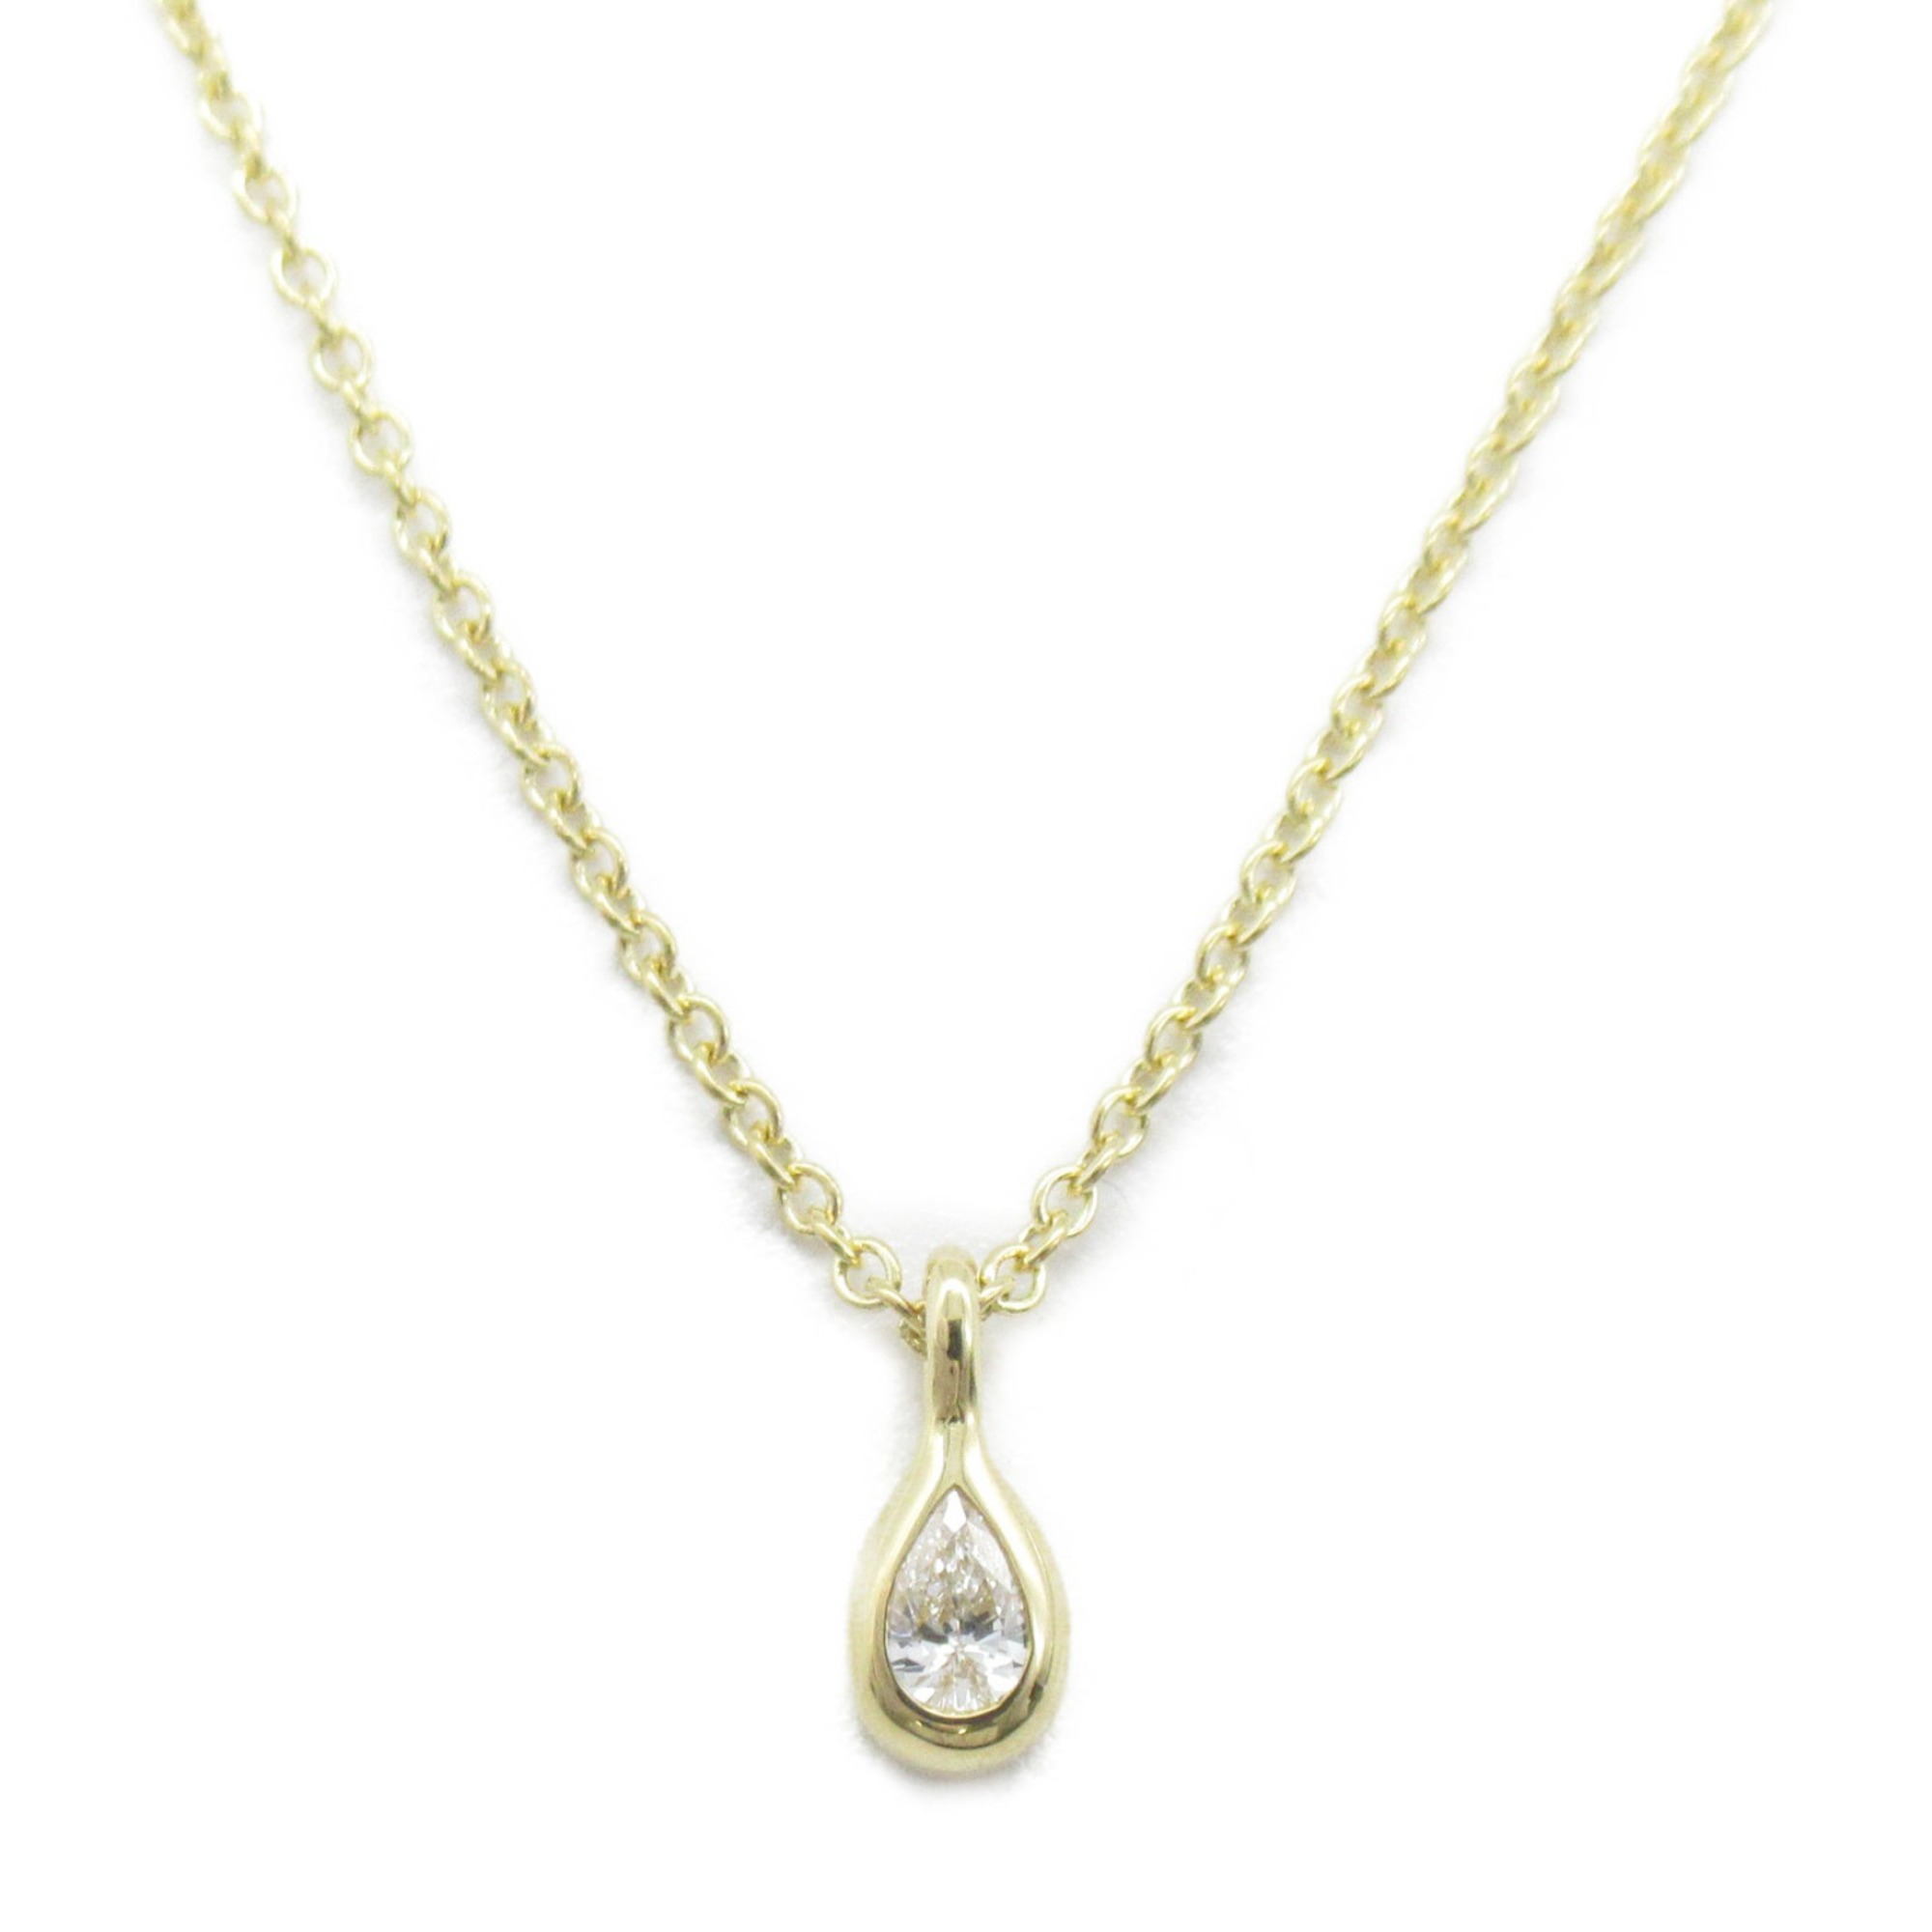 TIFFANY&CO Visor Yard Diamond Necklace Necklace Clear  K18 (Yellow Gold) Clear